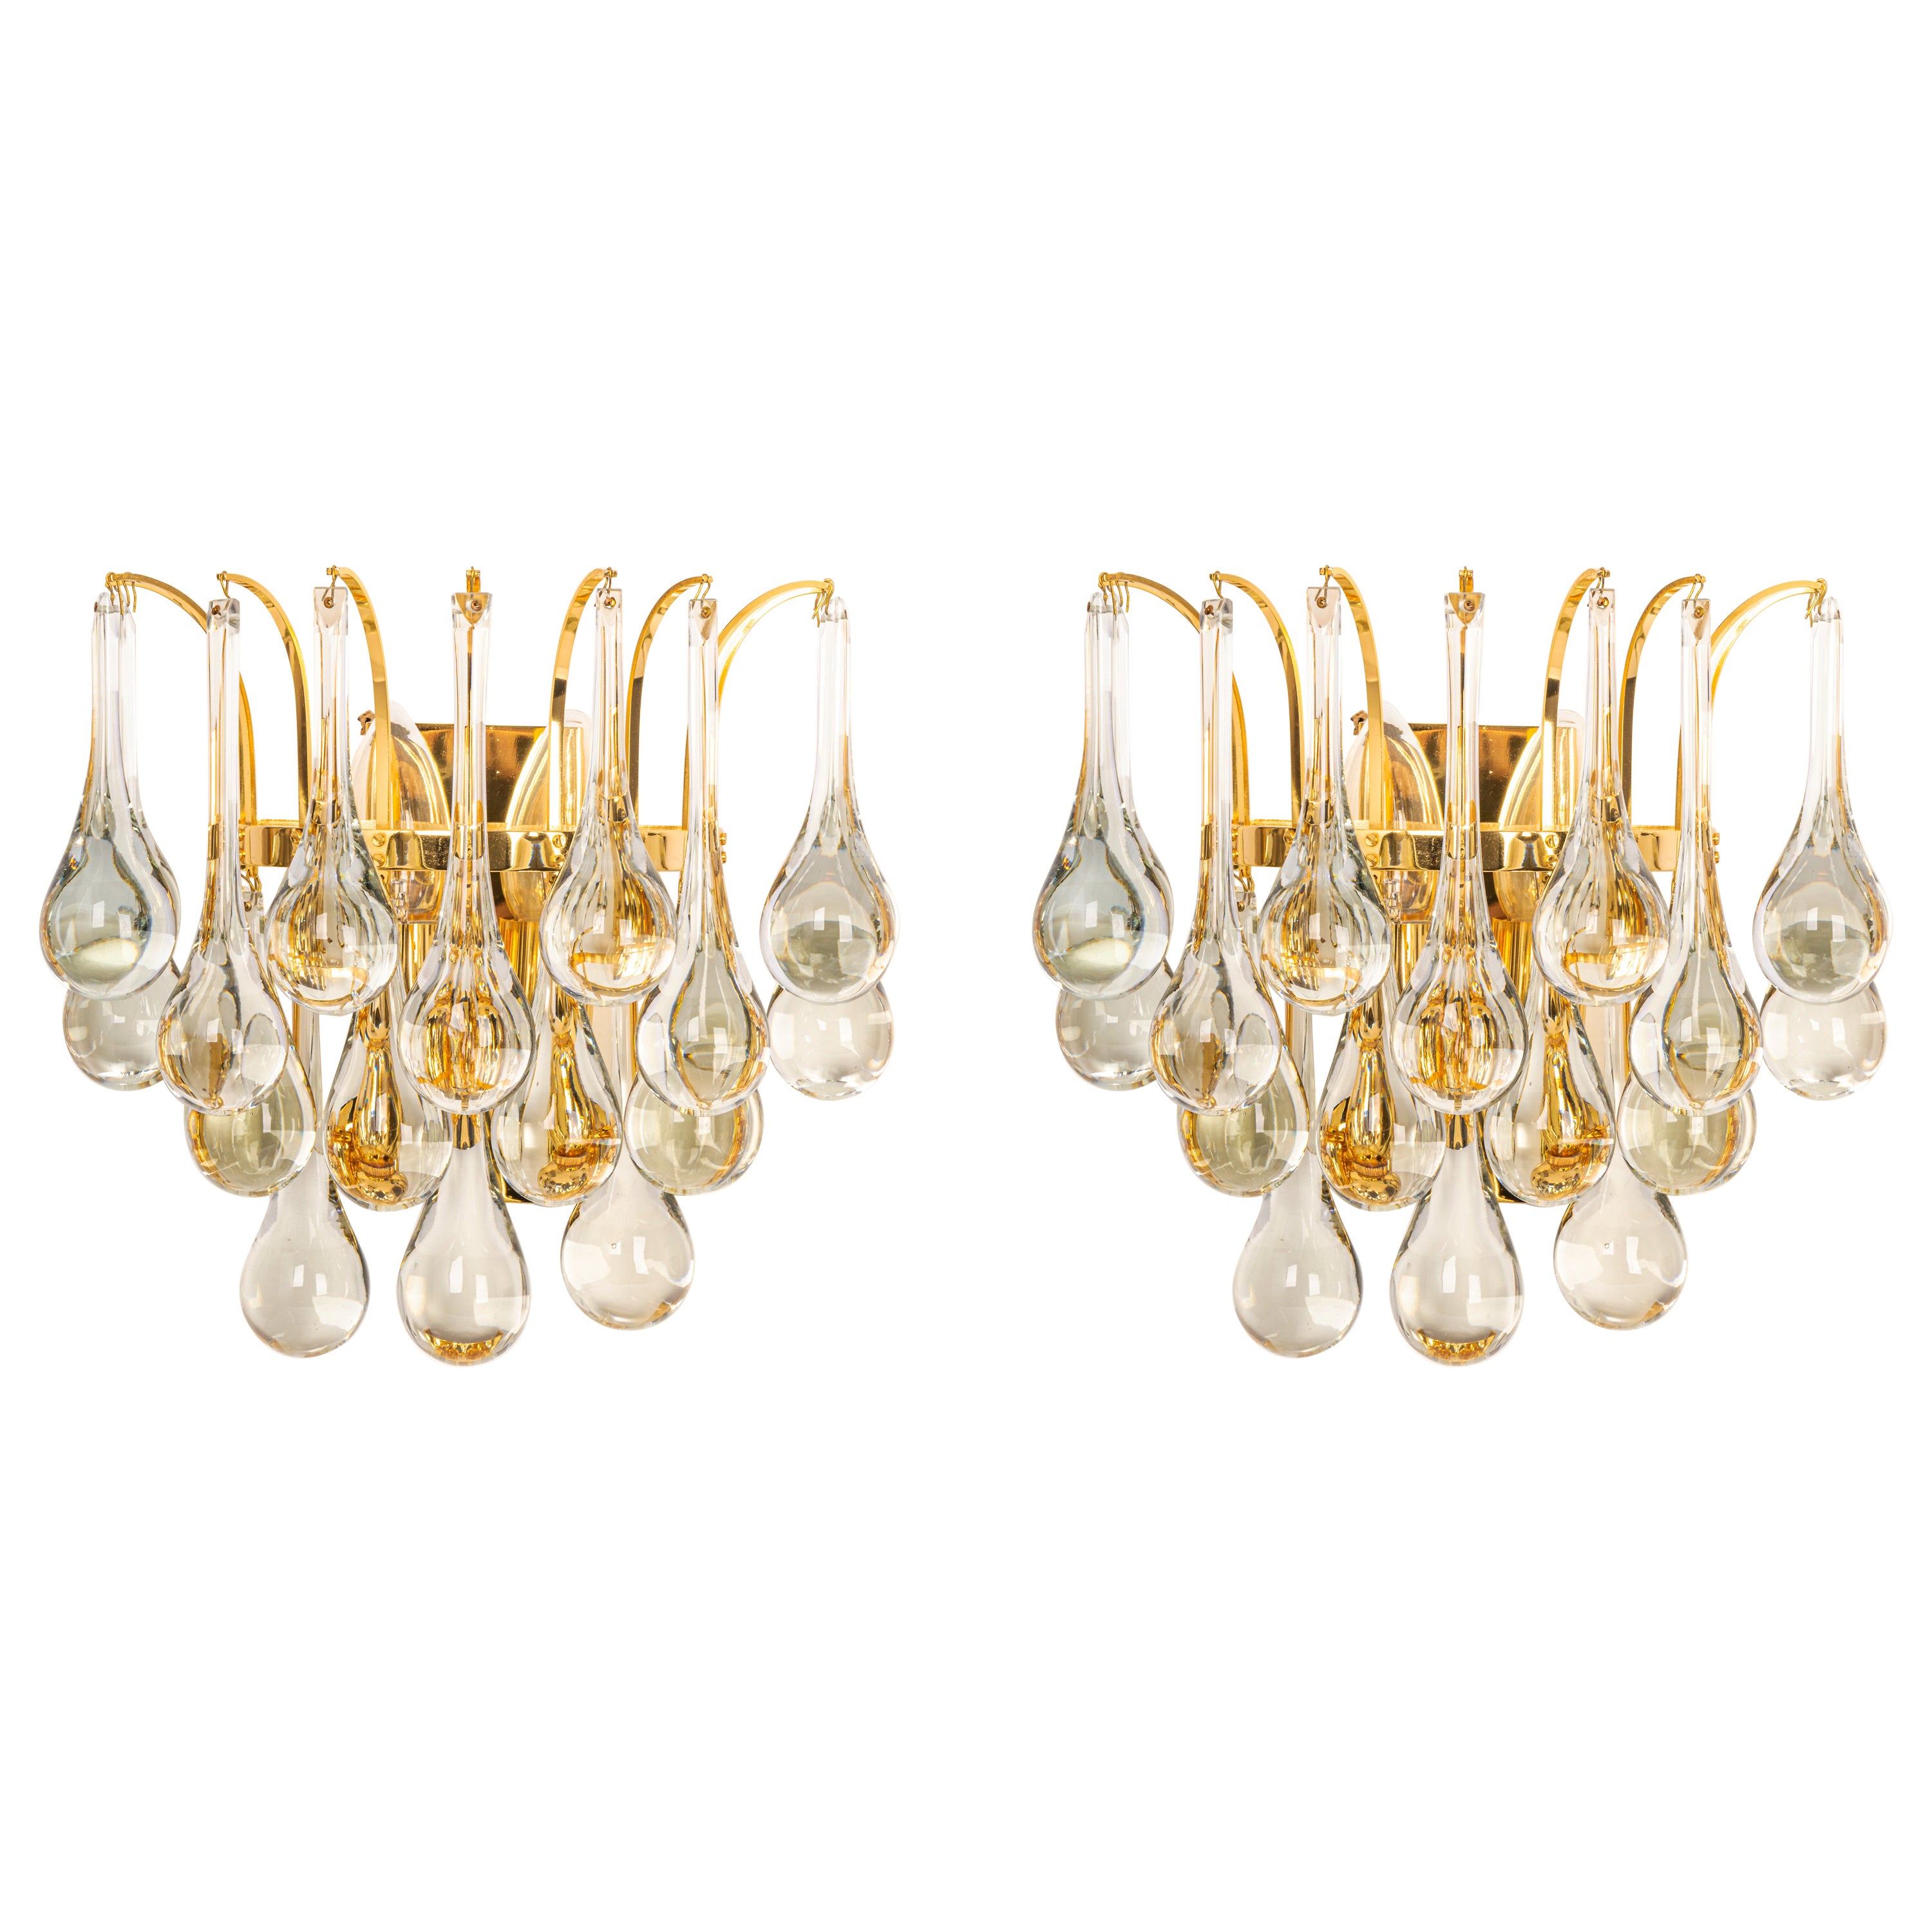 Large Pair of Golden Gilded Brass and Crystal Sconces by C.Palme, Germany, 1970s For Sale